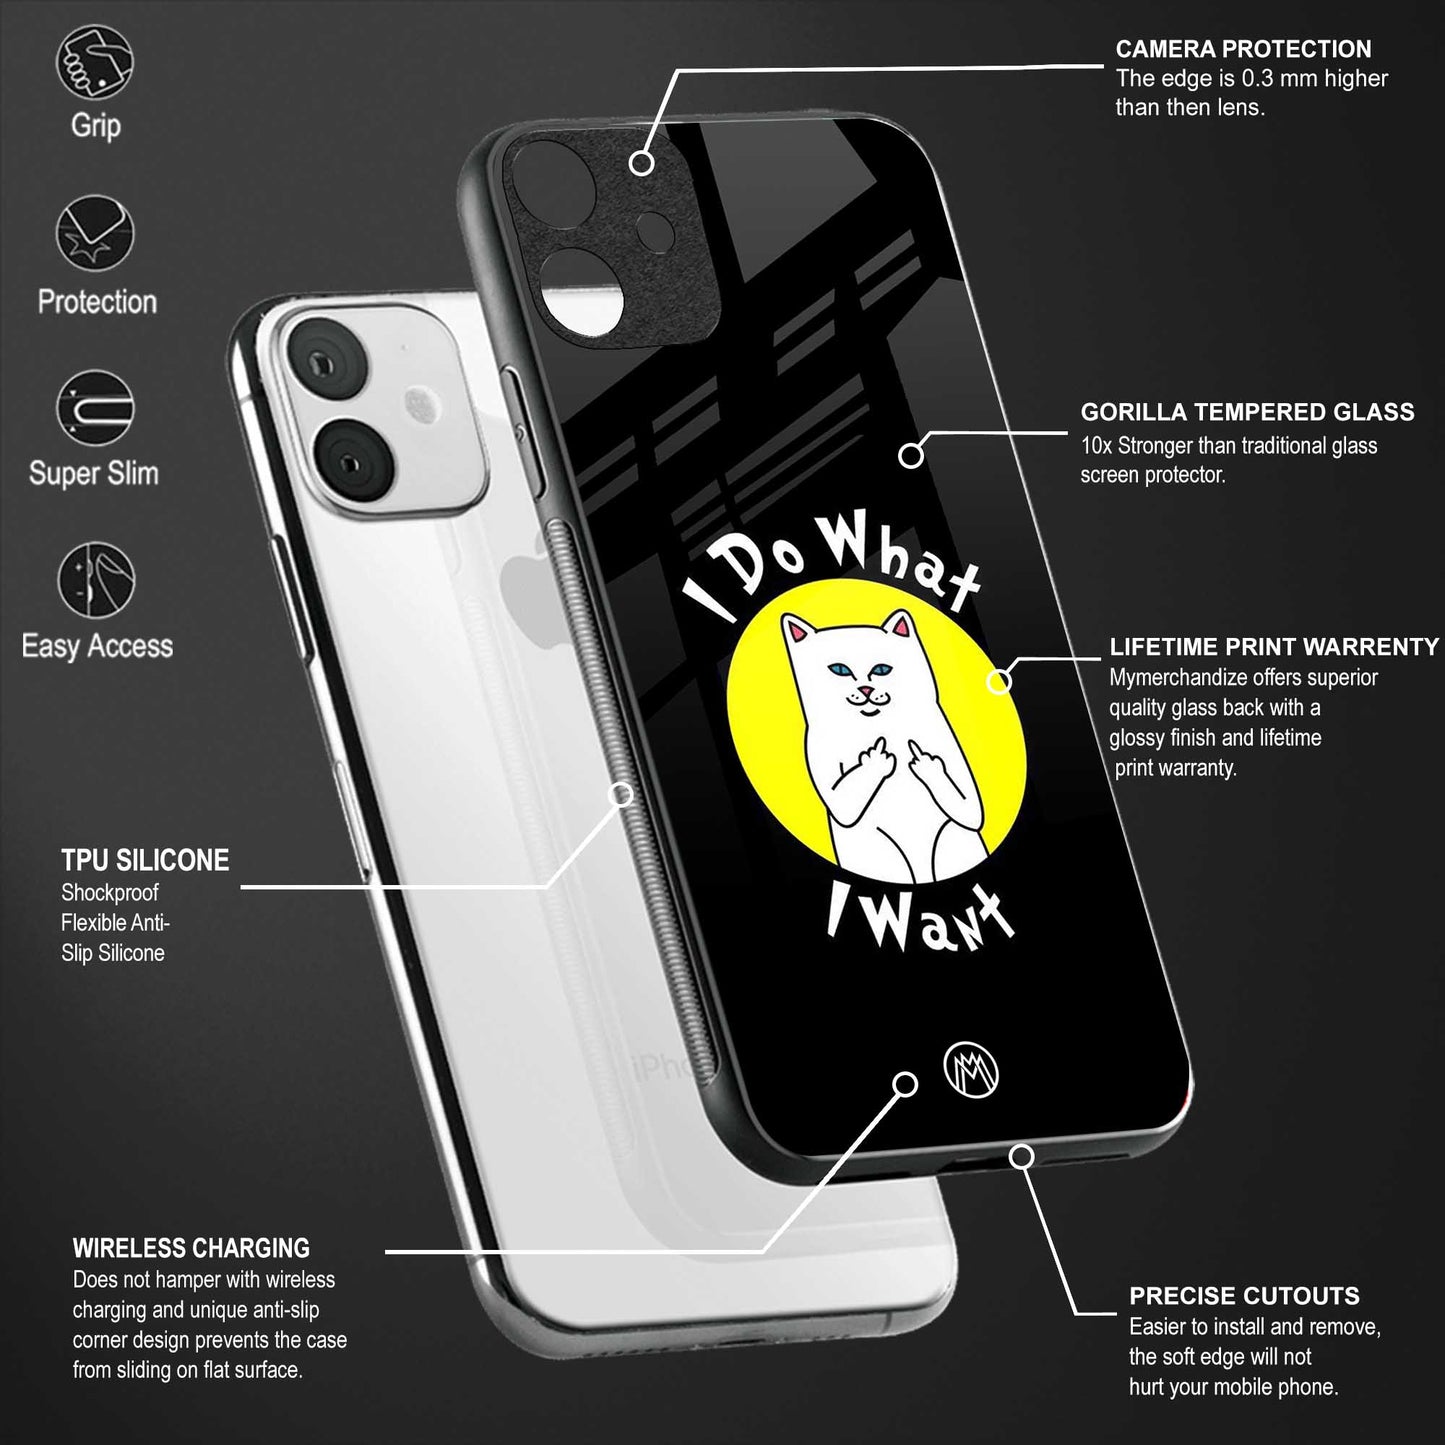 i do what i want glass case for redmi note 7 pro